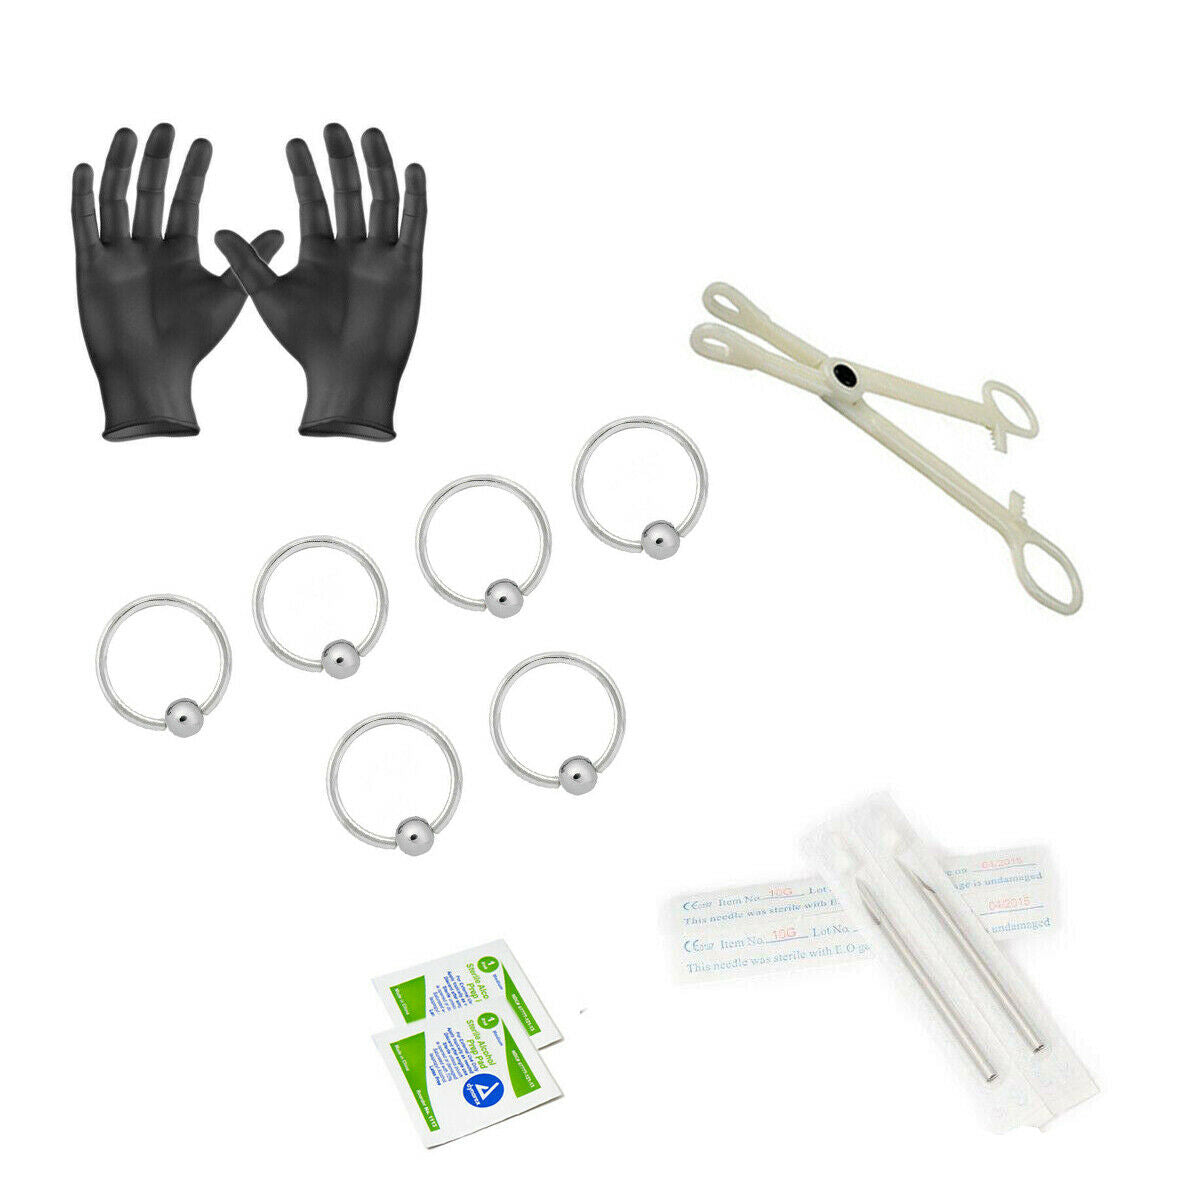 12-Piece Captive bead Piercing Kit - Includes (6) 14g Captive bead rings, (2) Needles, (1) Forceps, (2) Alcohol Wipes and a Pair of Gloves